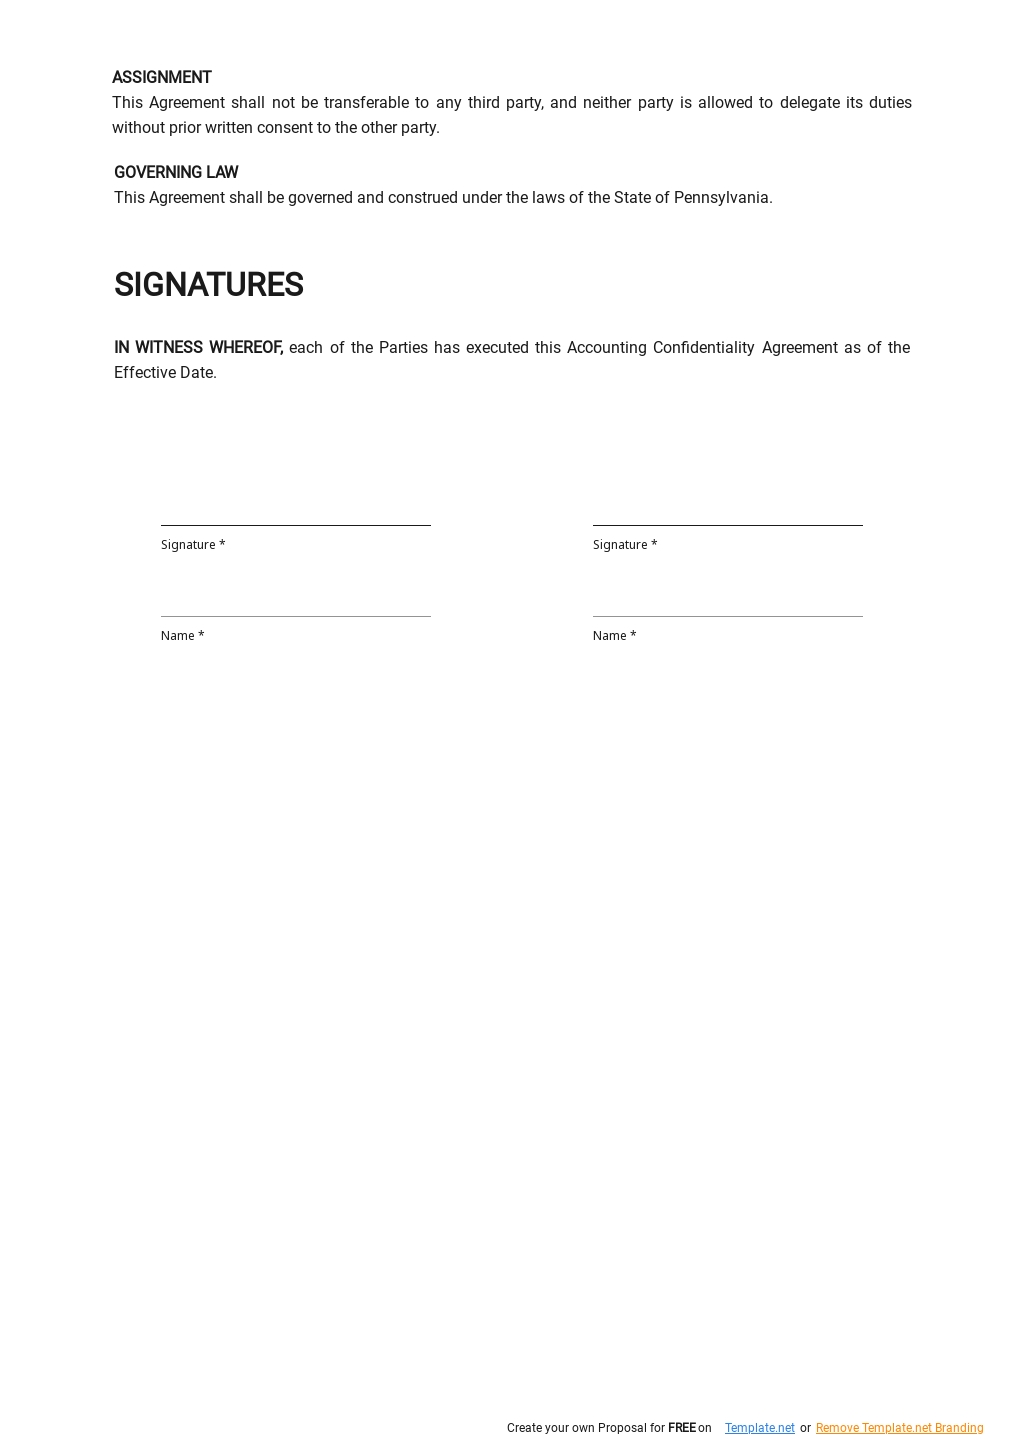 Sample Accounting Confidentiality Agreement Template 2.jpe